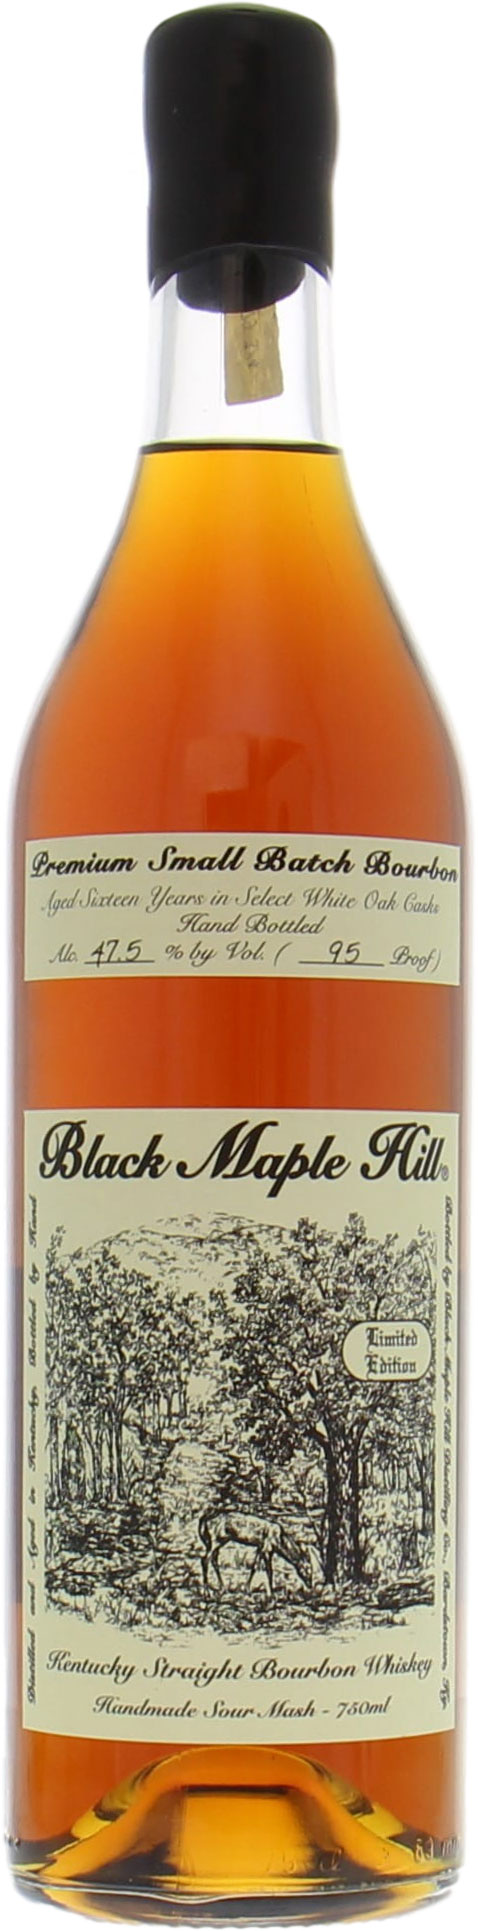 Black Maple Hill - 16 Years Old Premium Small Batch 47.5% NV